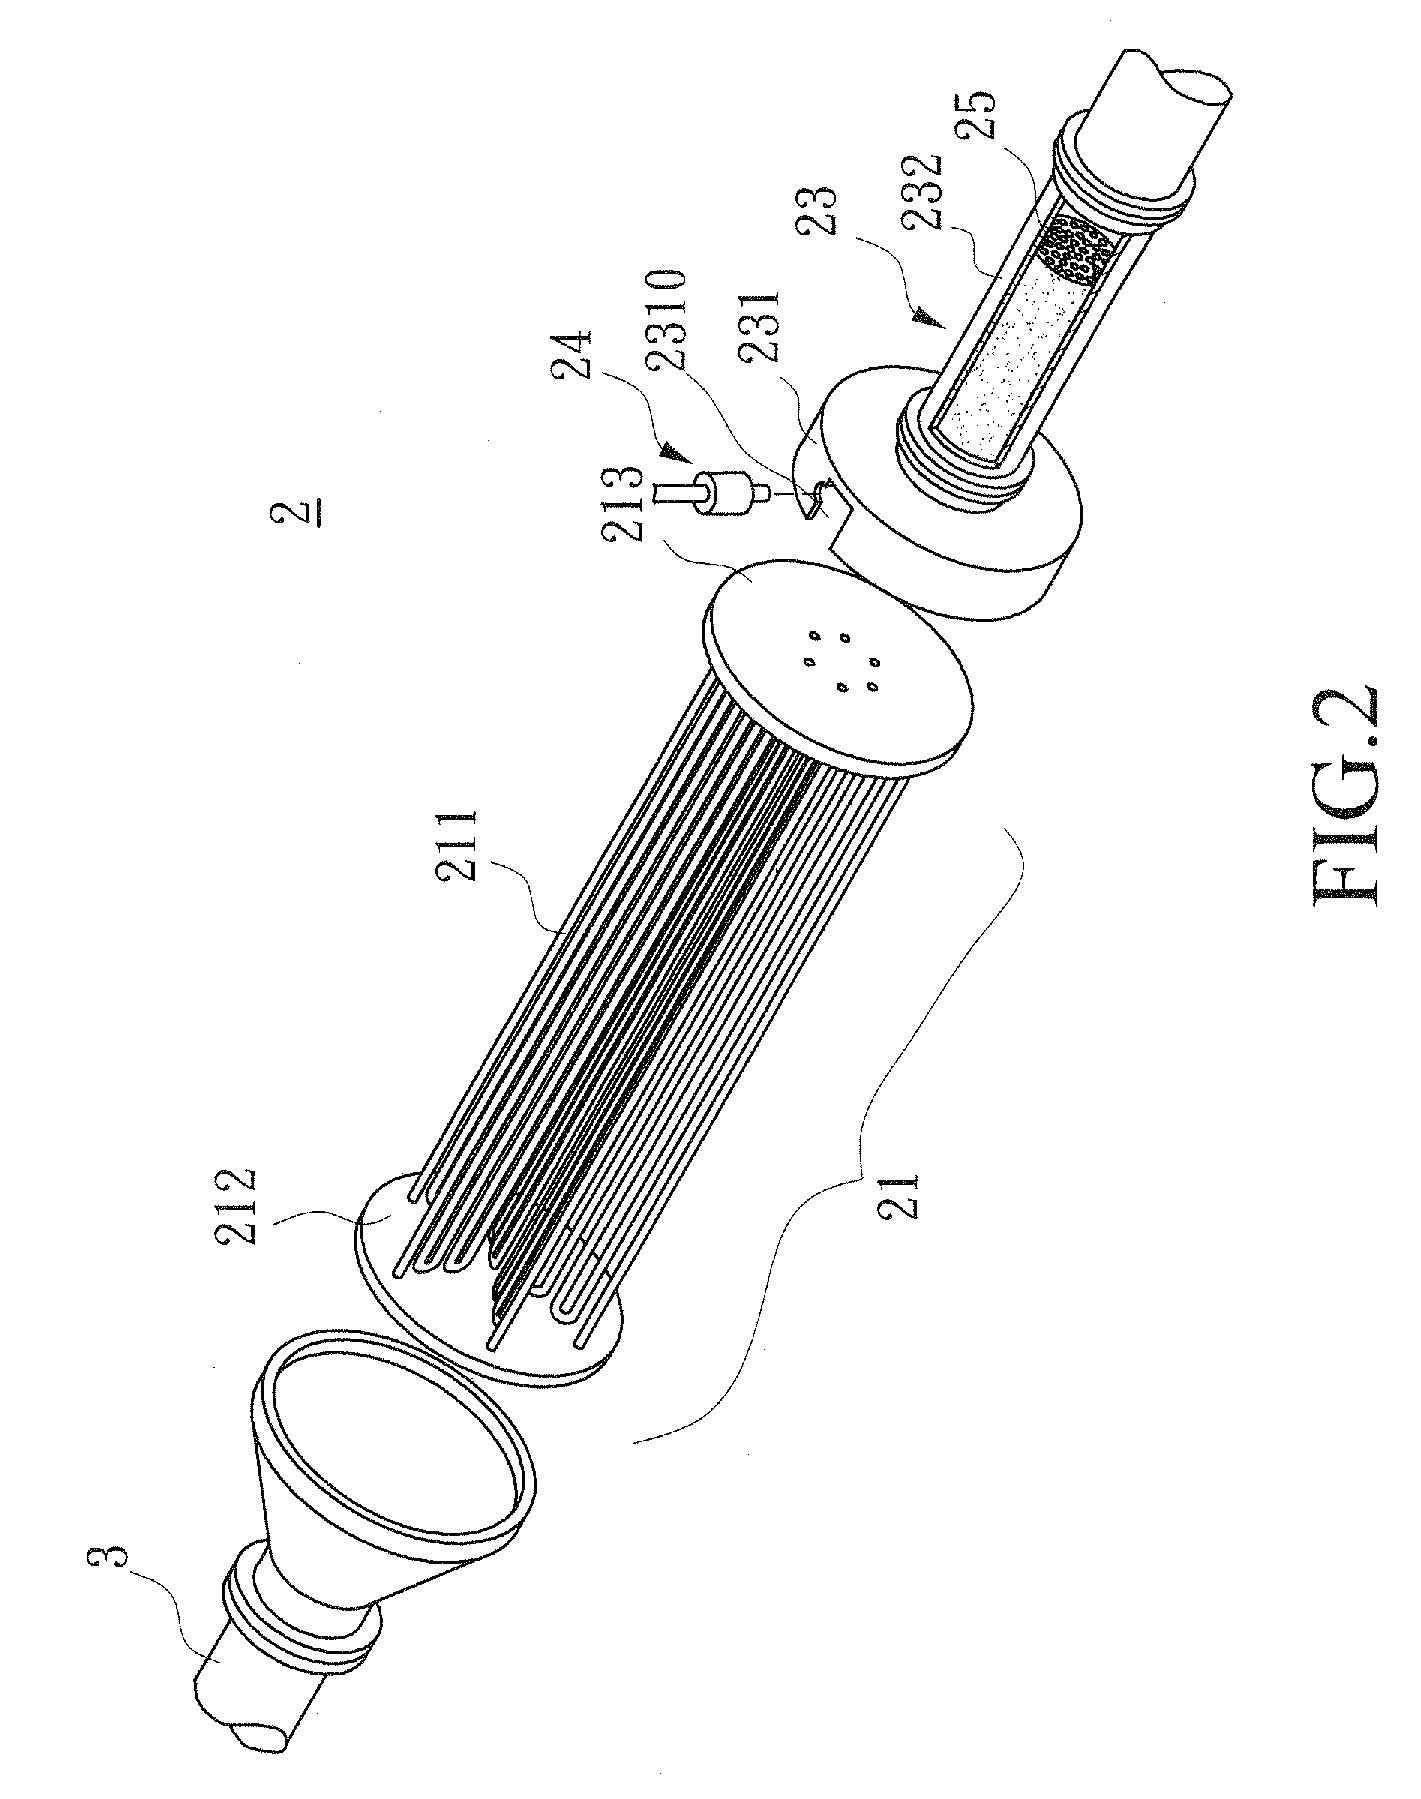 Instantaneous neutralization and purification device for smoke and exhaust gas discharged from automobile